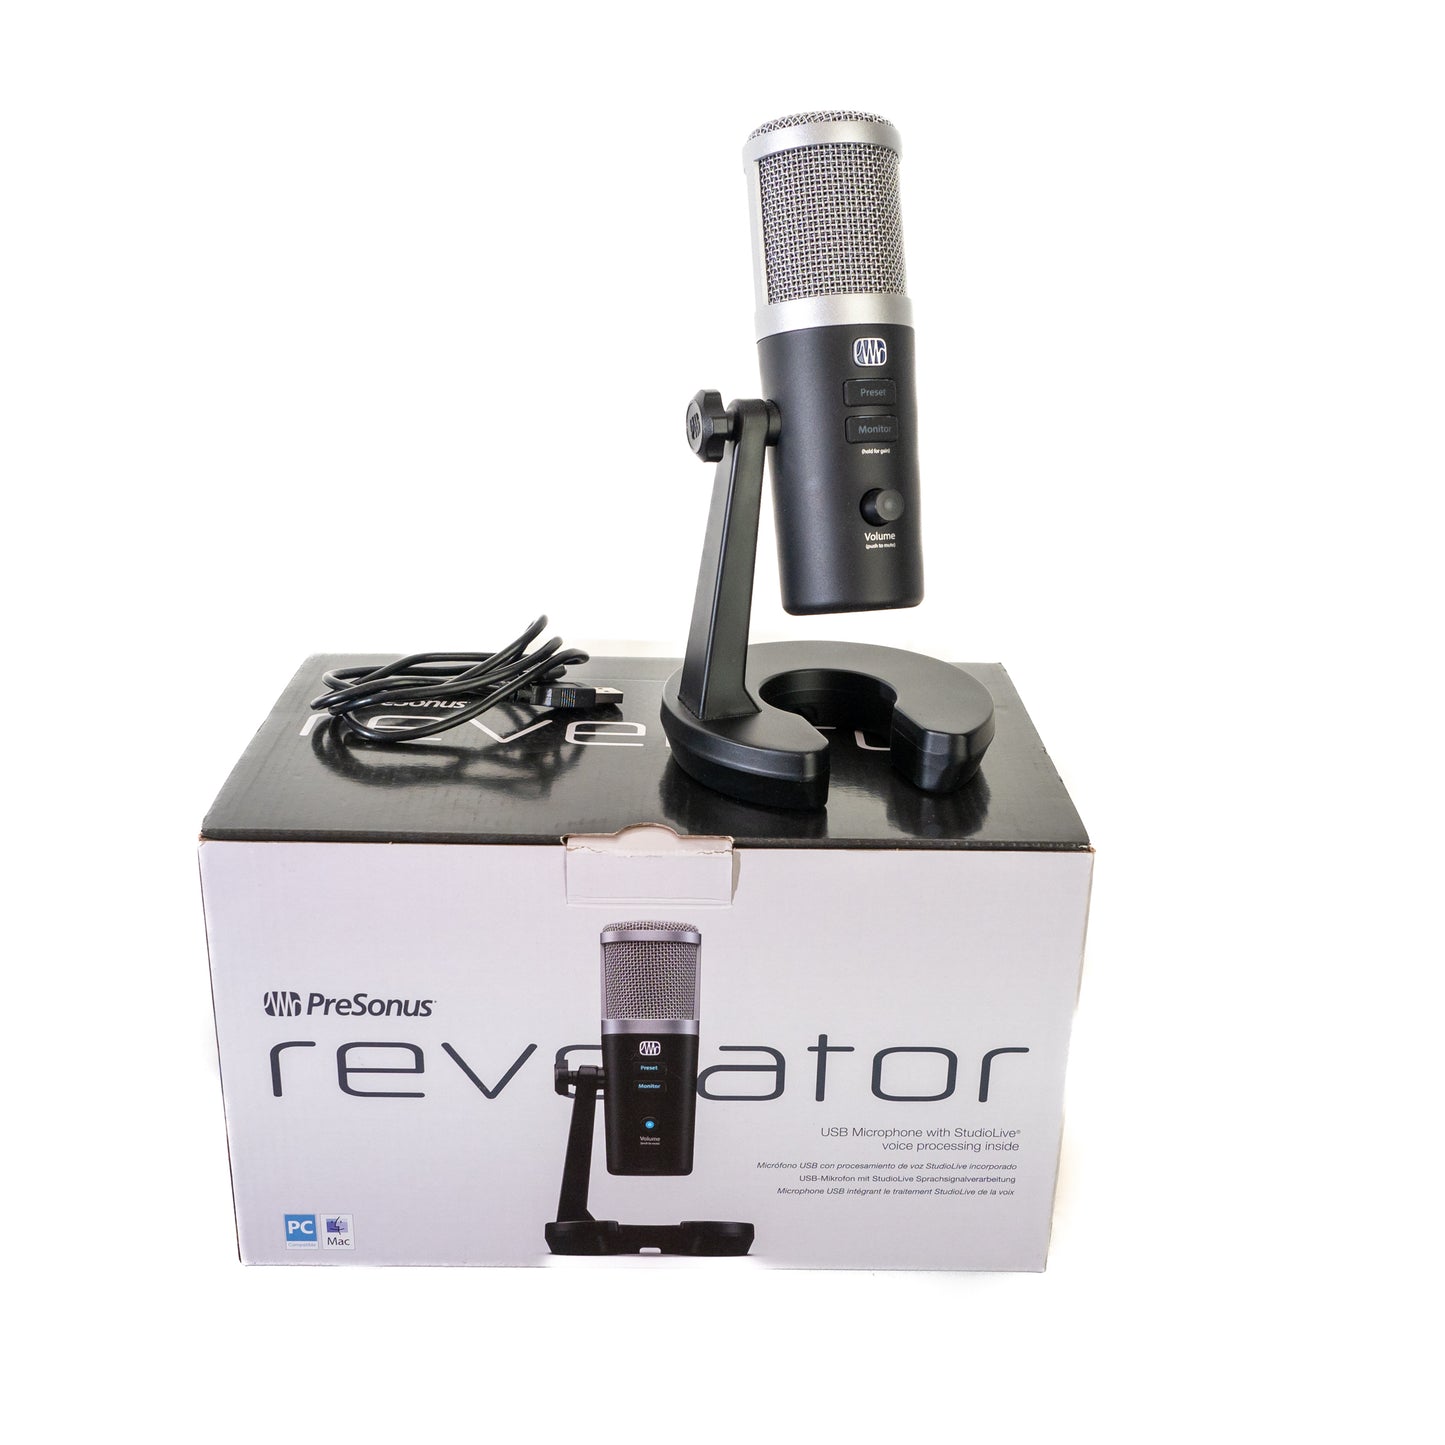 Presonus Revelator demo model USB Microphone with stand, software not included